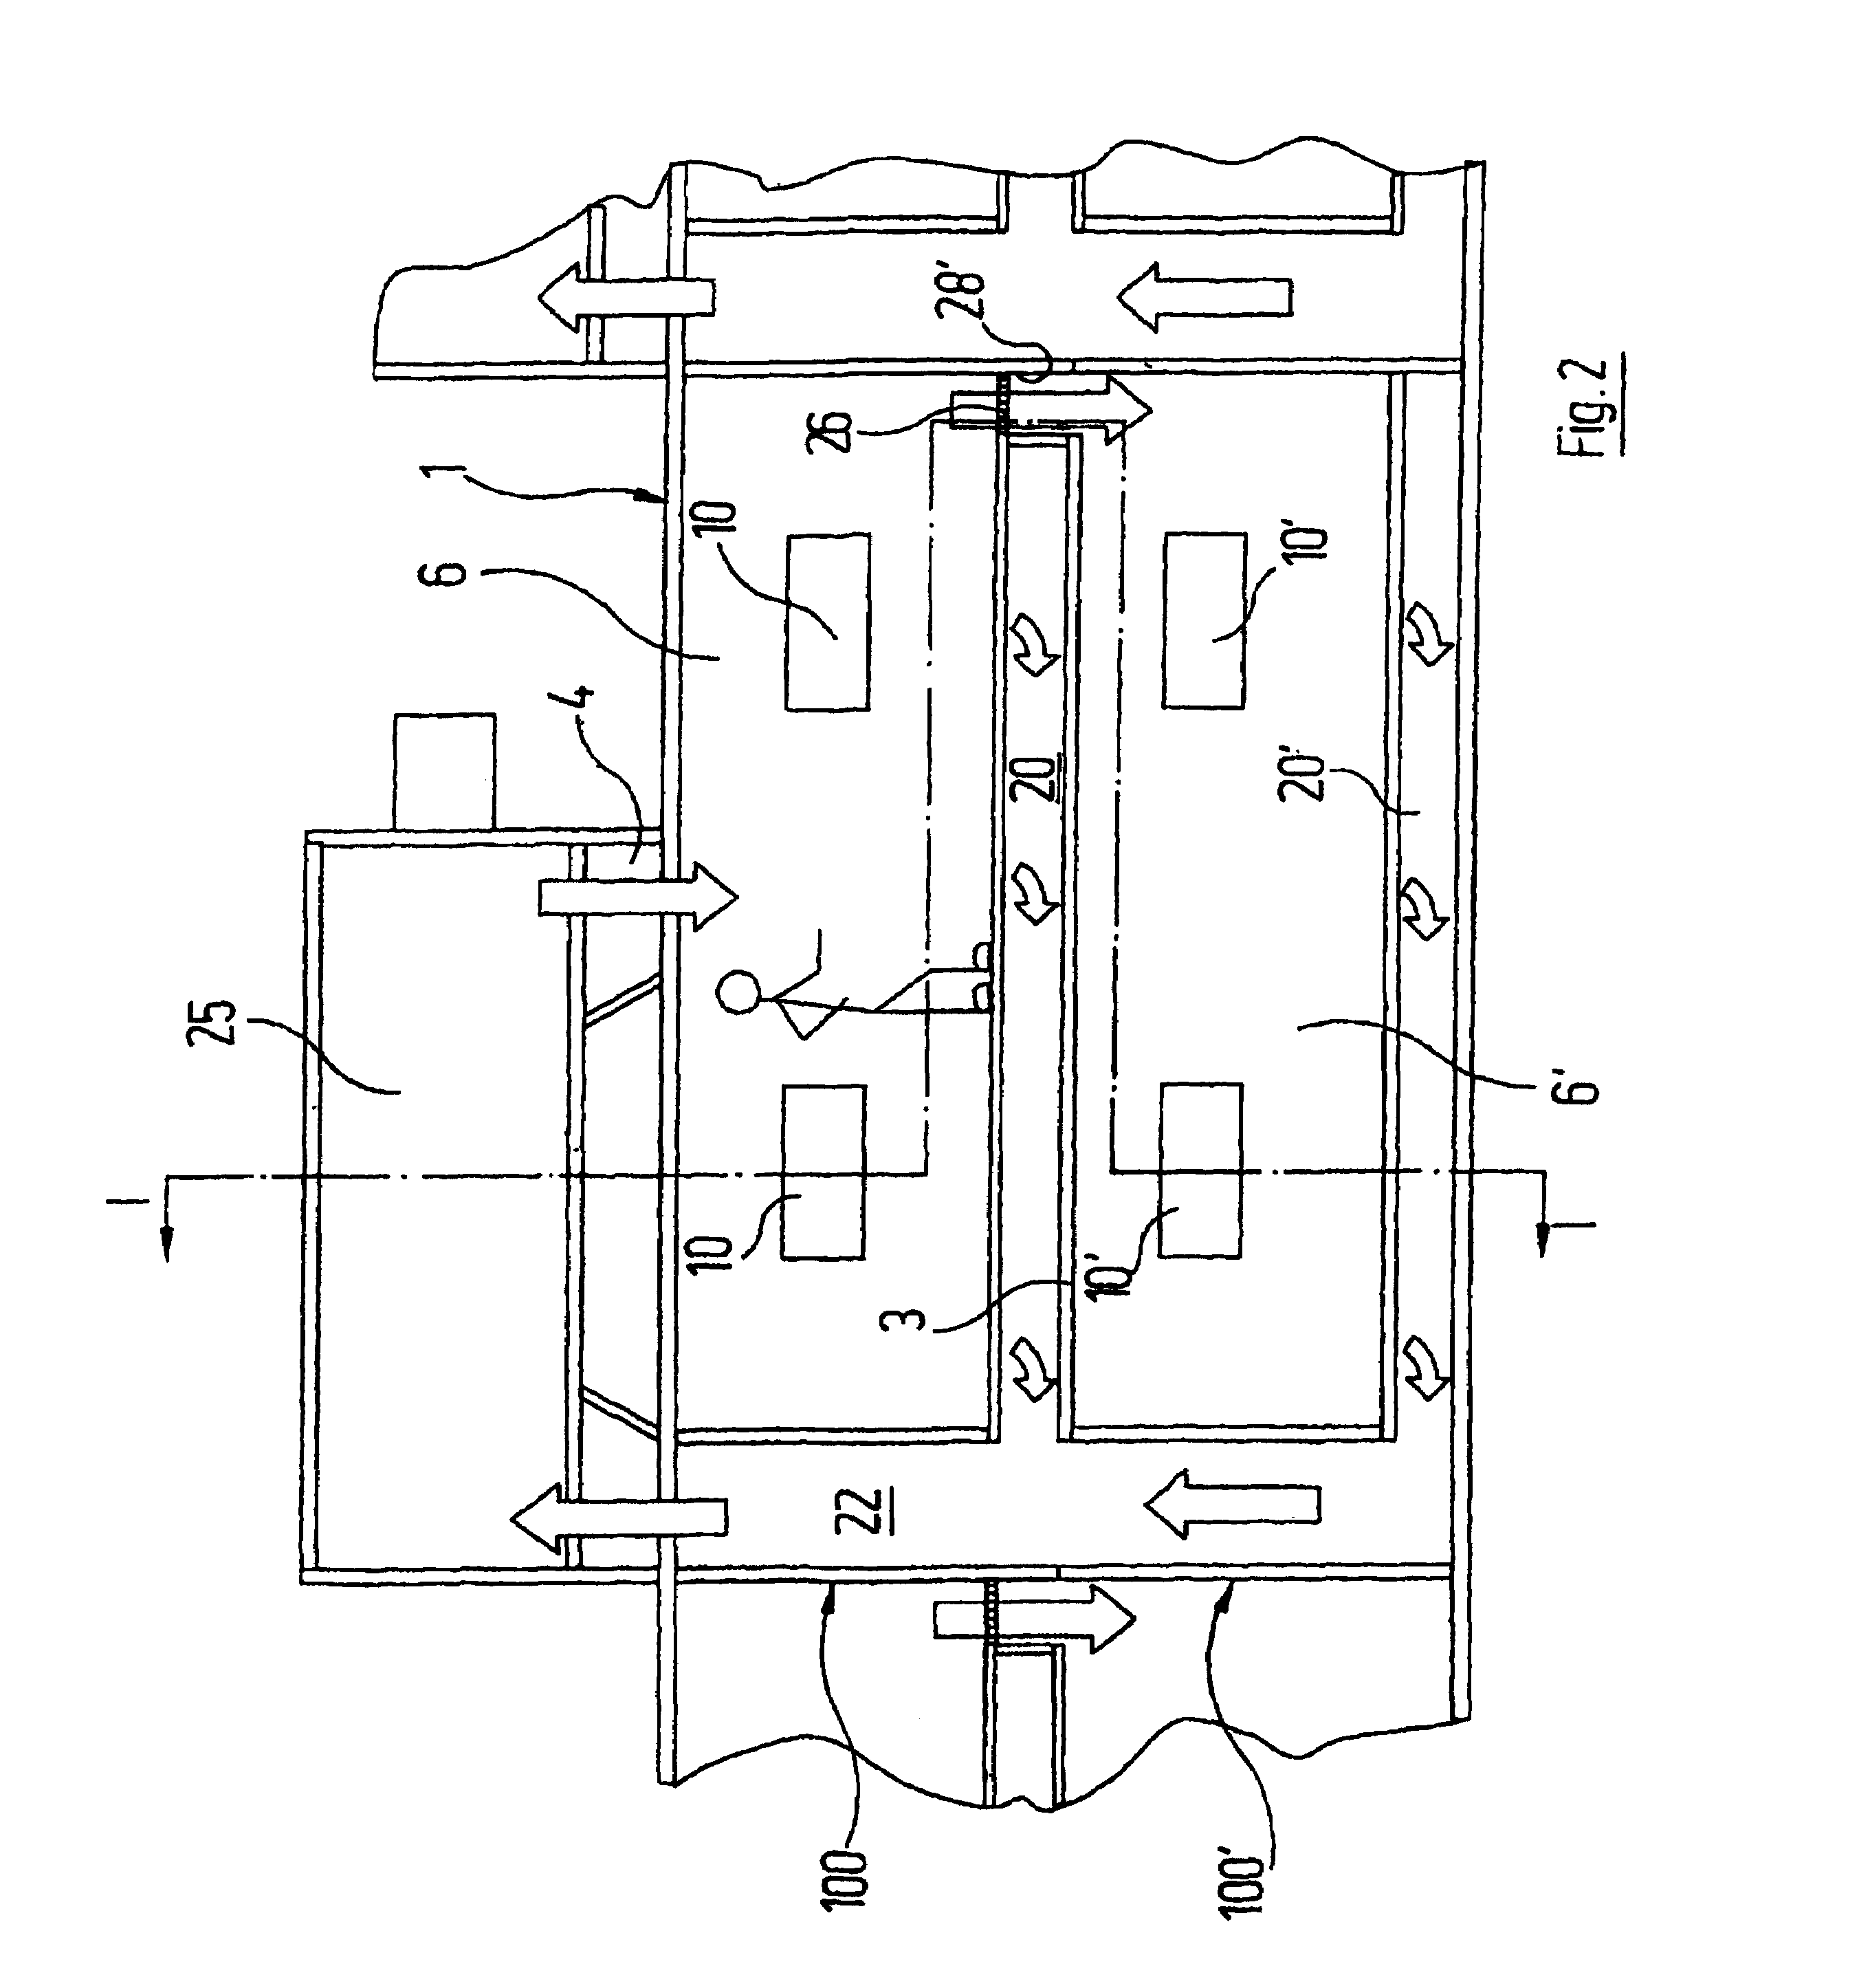 Device for controlling the temperature of objects